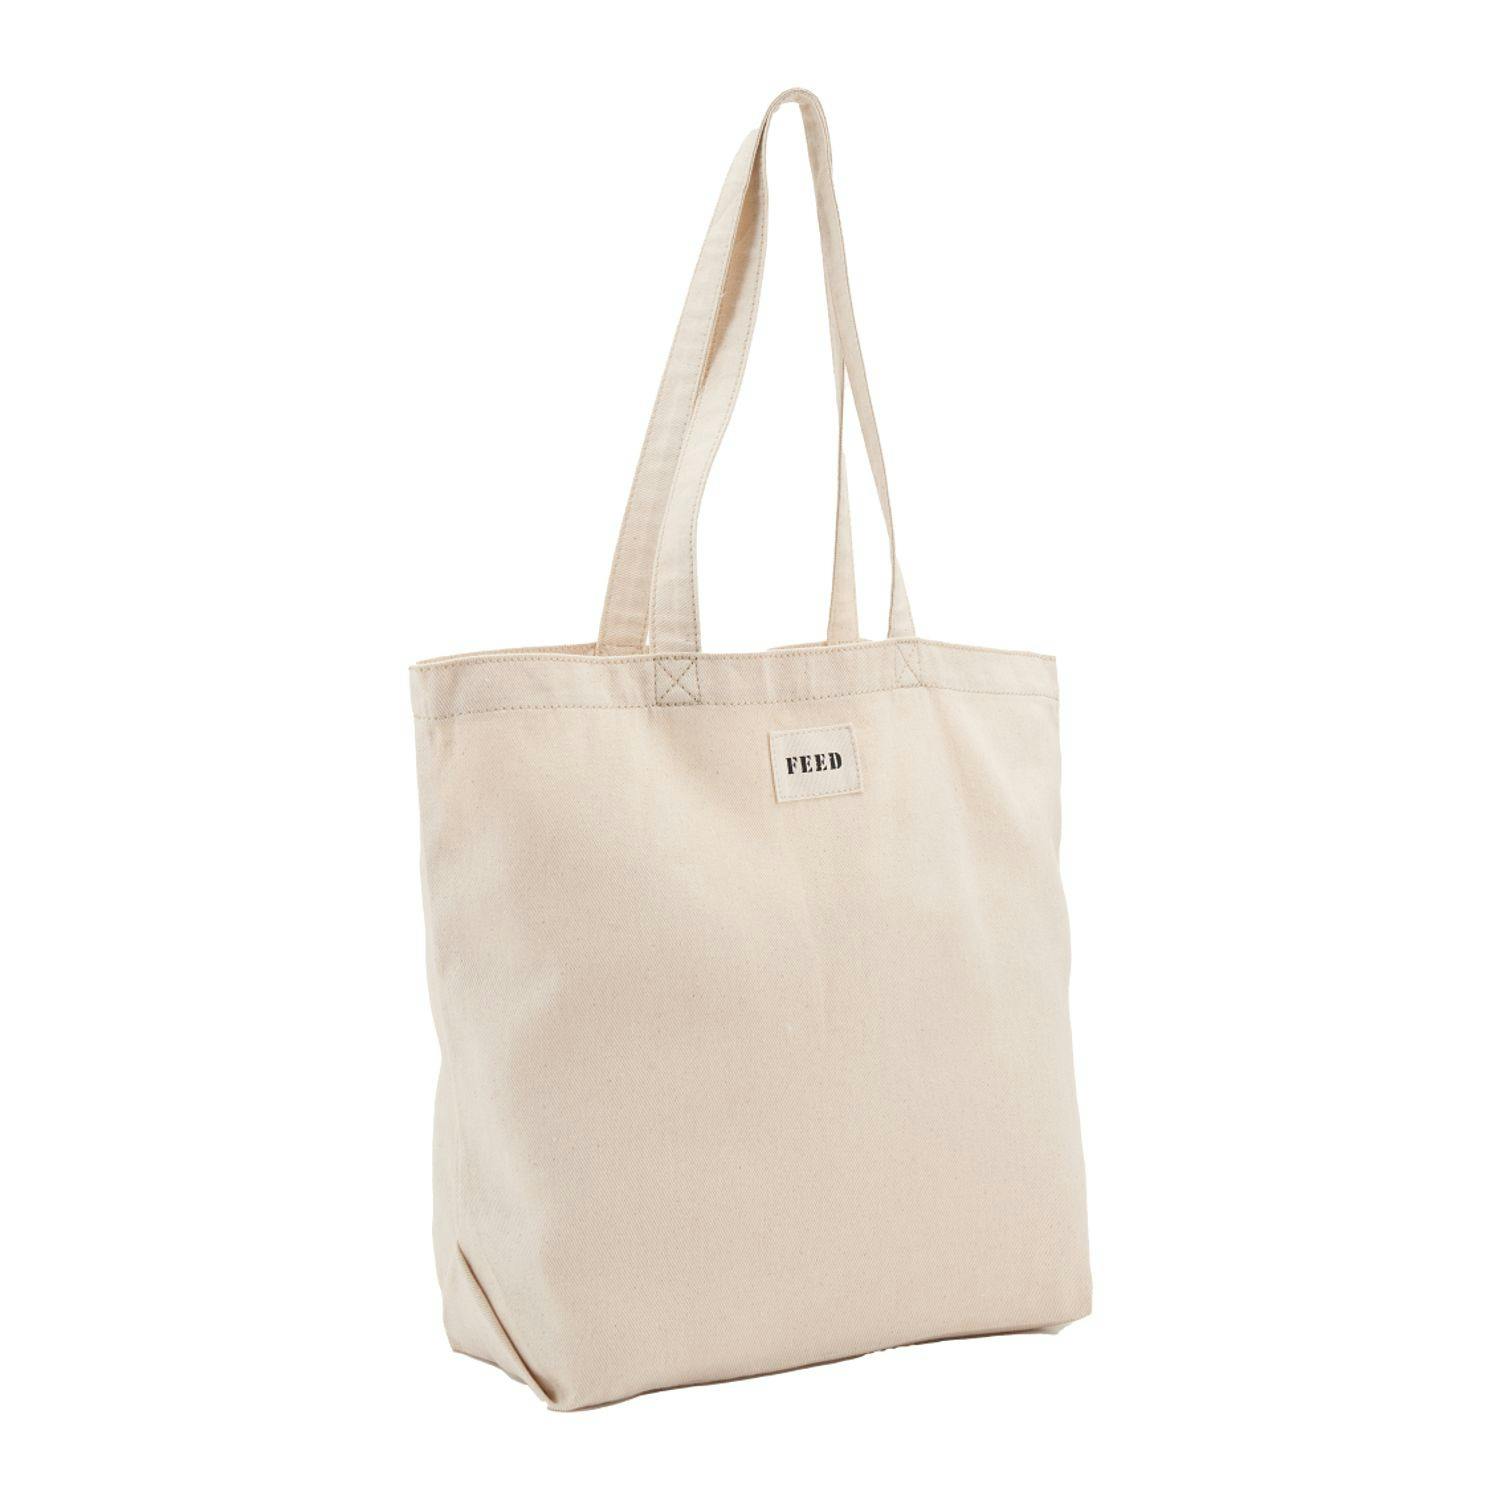 FEED Organic Cotton Shopper Tote - additional Image 1